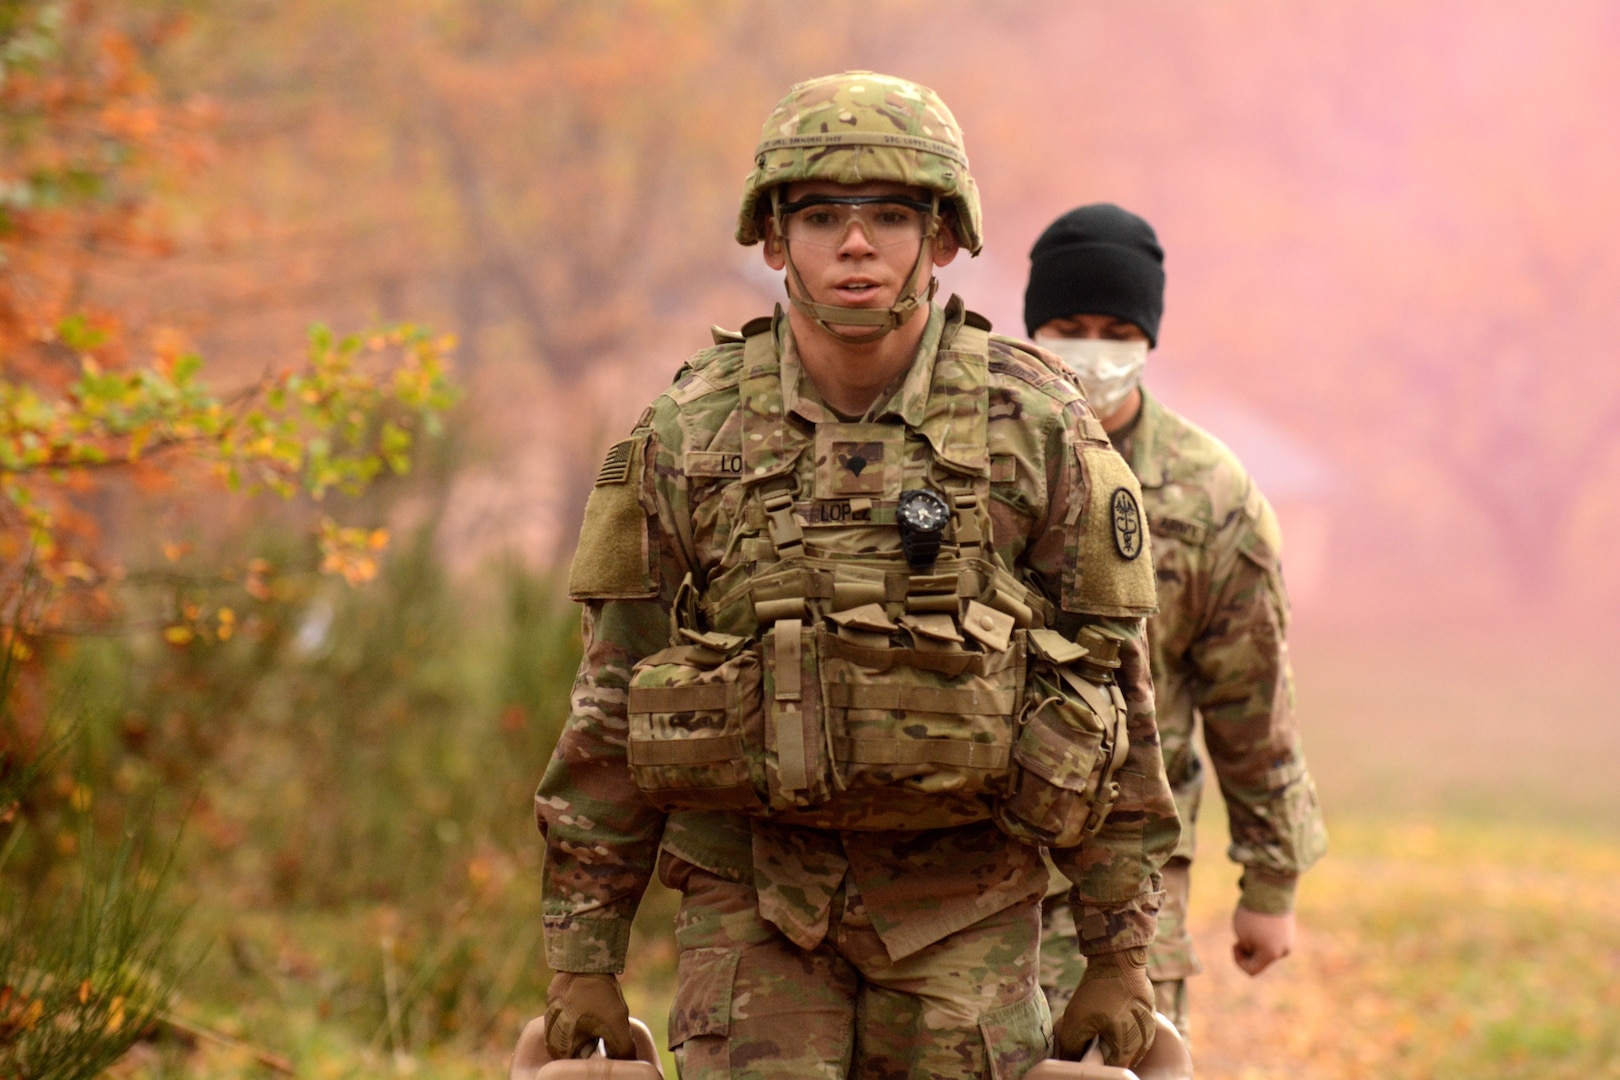 Spc. Brenden Lopez, assigned to U.S. Army Medical Department Activity-Bavaria, carries water jugs during the stress shoot portion of the Regional Health Command Europe Best Warrior competition Nov. 3 and 4 in Baumholder.  Lopez was the winner in the 'Soldier' category.